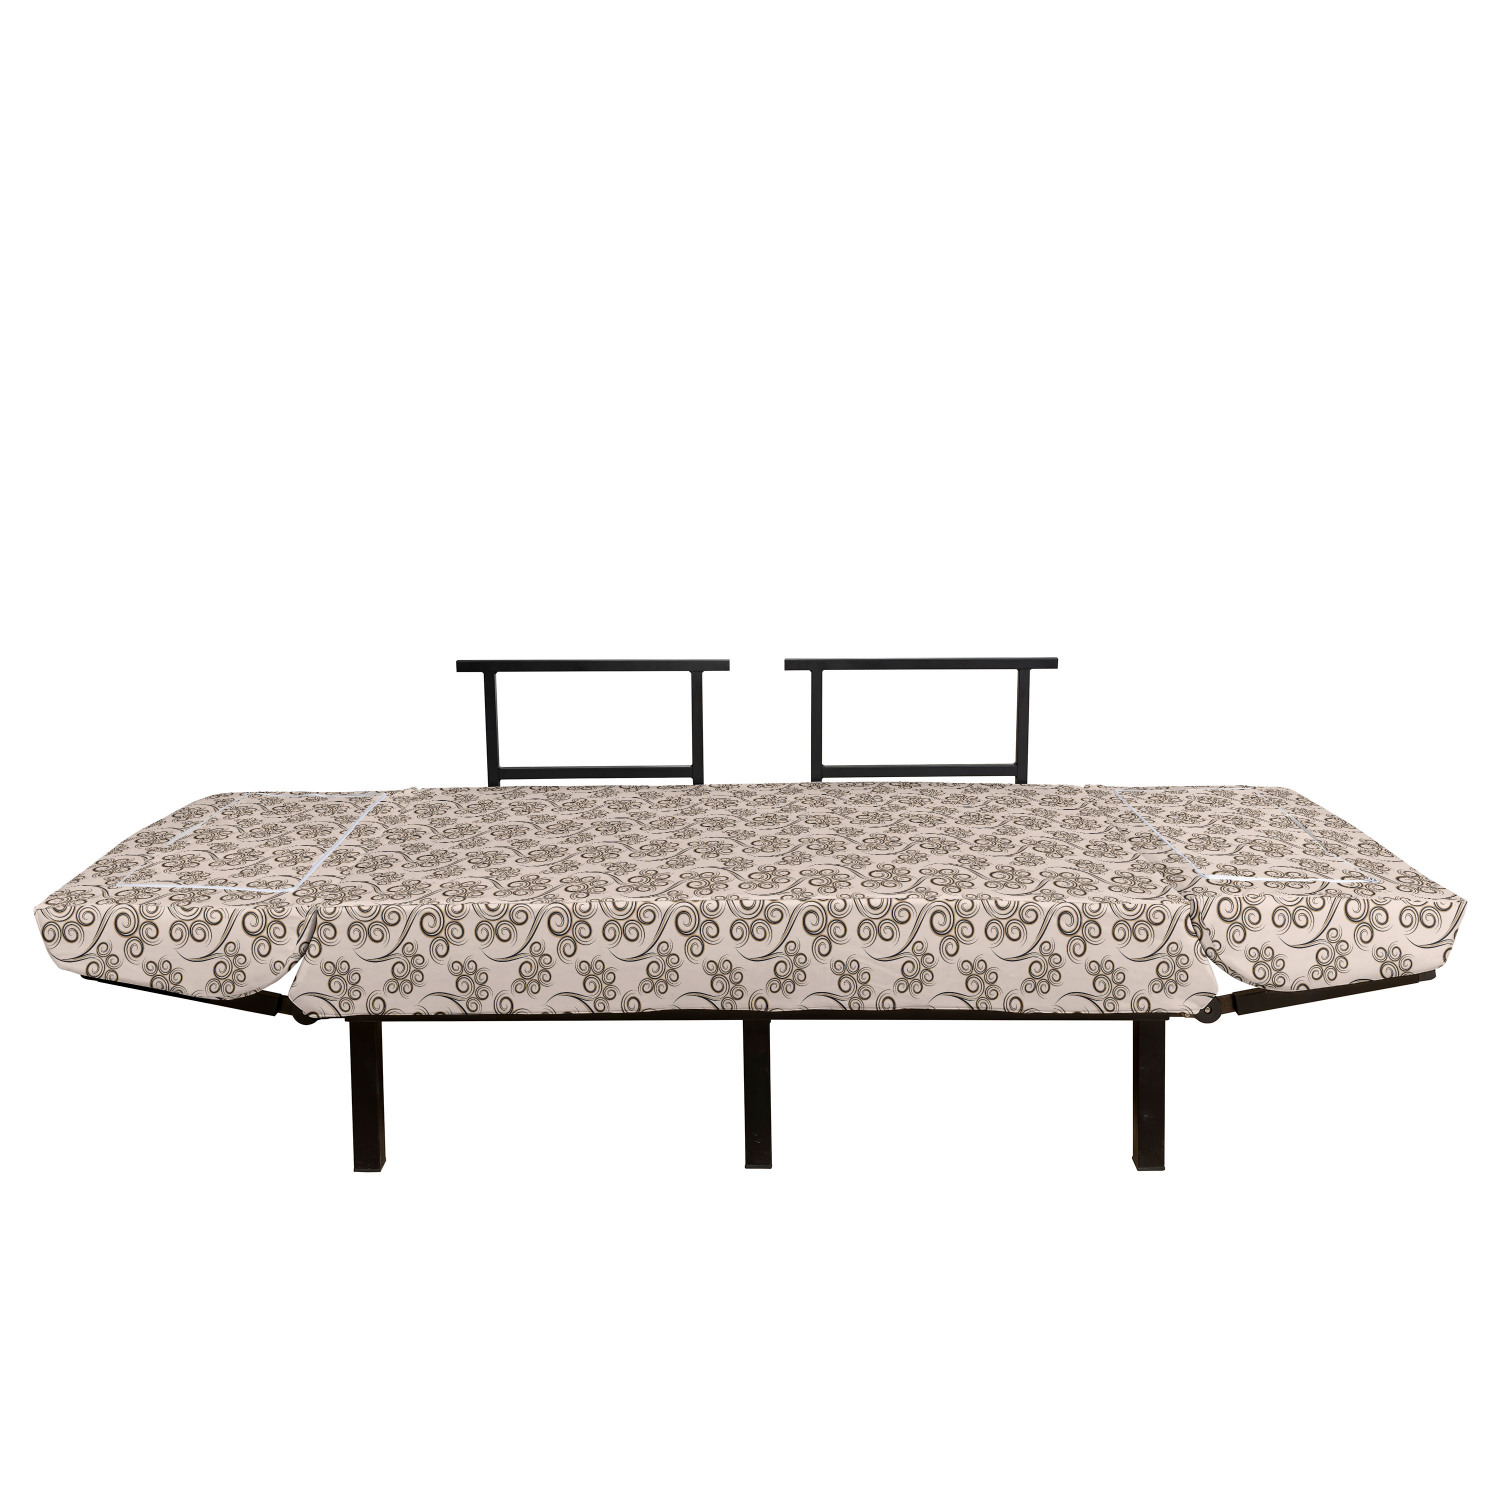 Daybed with Metal Frame Upholstered Sofa for Living Dorm Loveseat Tribal Geometric Design with Moire Circles and Radial Lines Arrangement Caramel and Beige Ambesonne Geometric Futon Couch